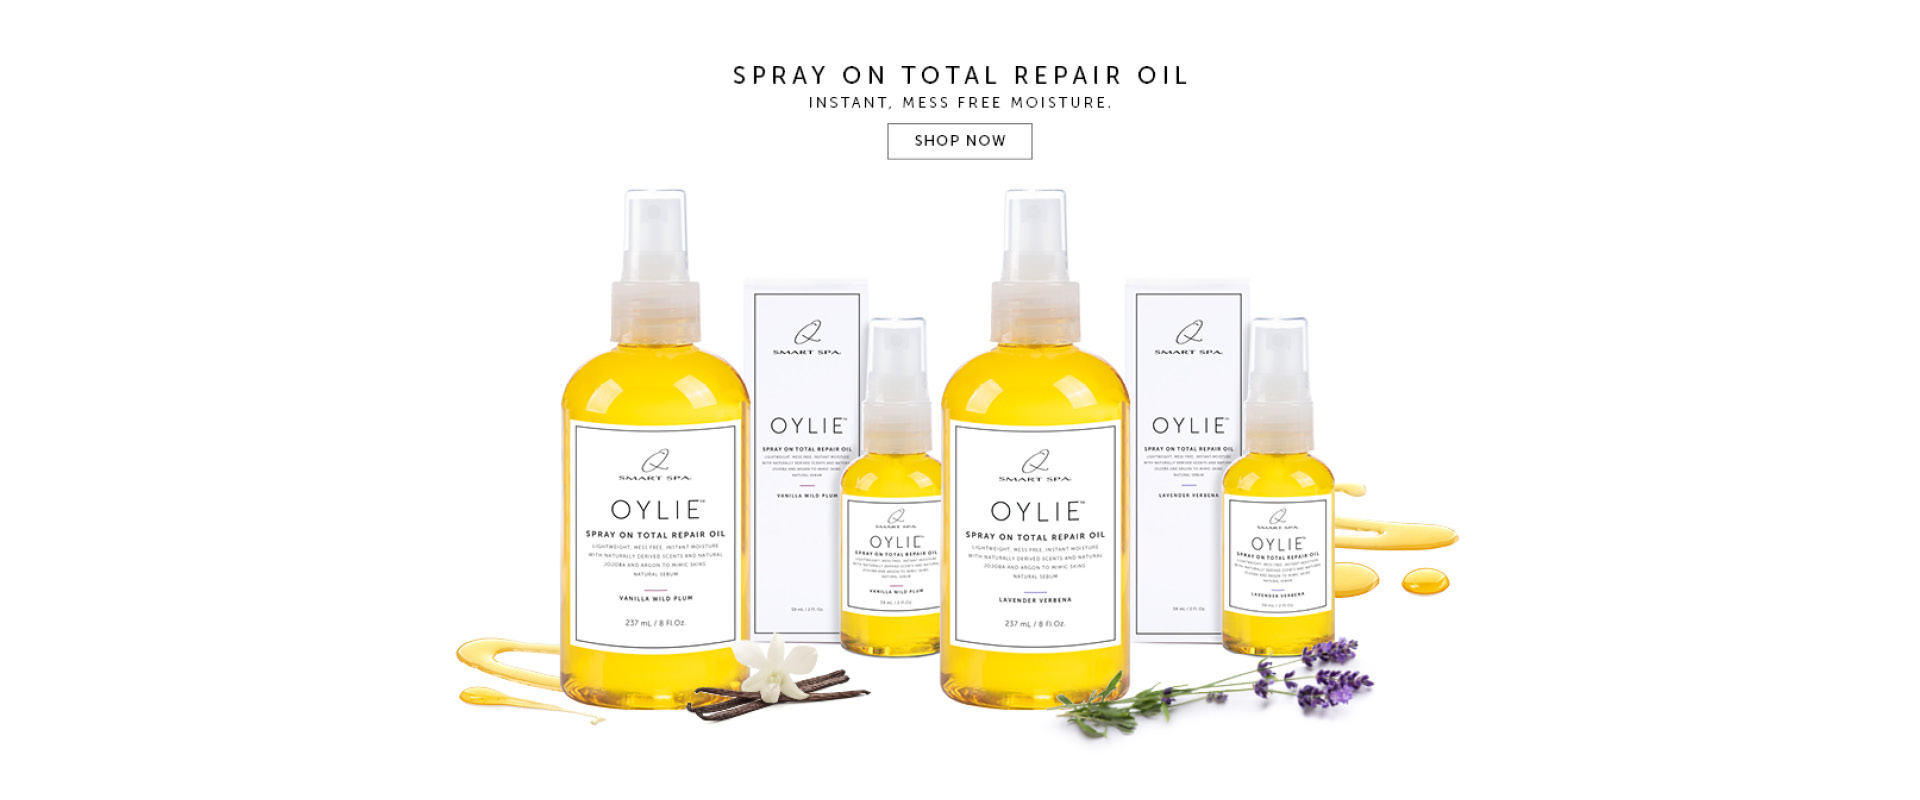 Oylie Spray on total repair oil. Instant Mess Free Moisture. Shop Now